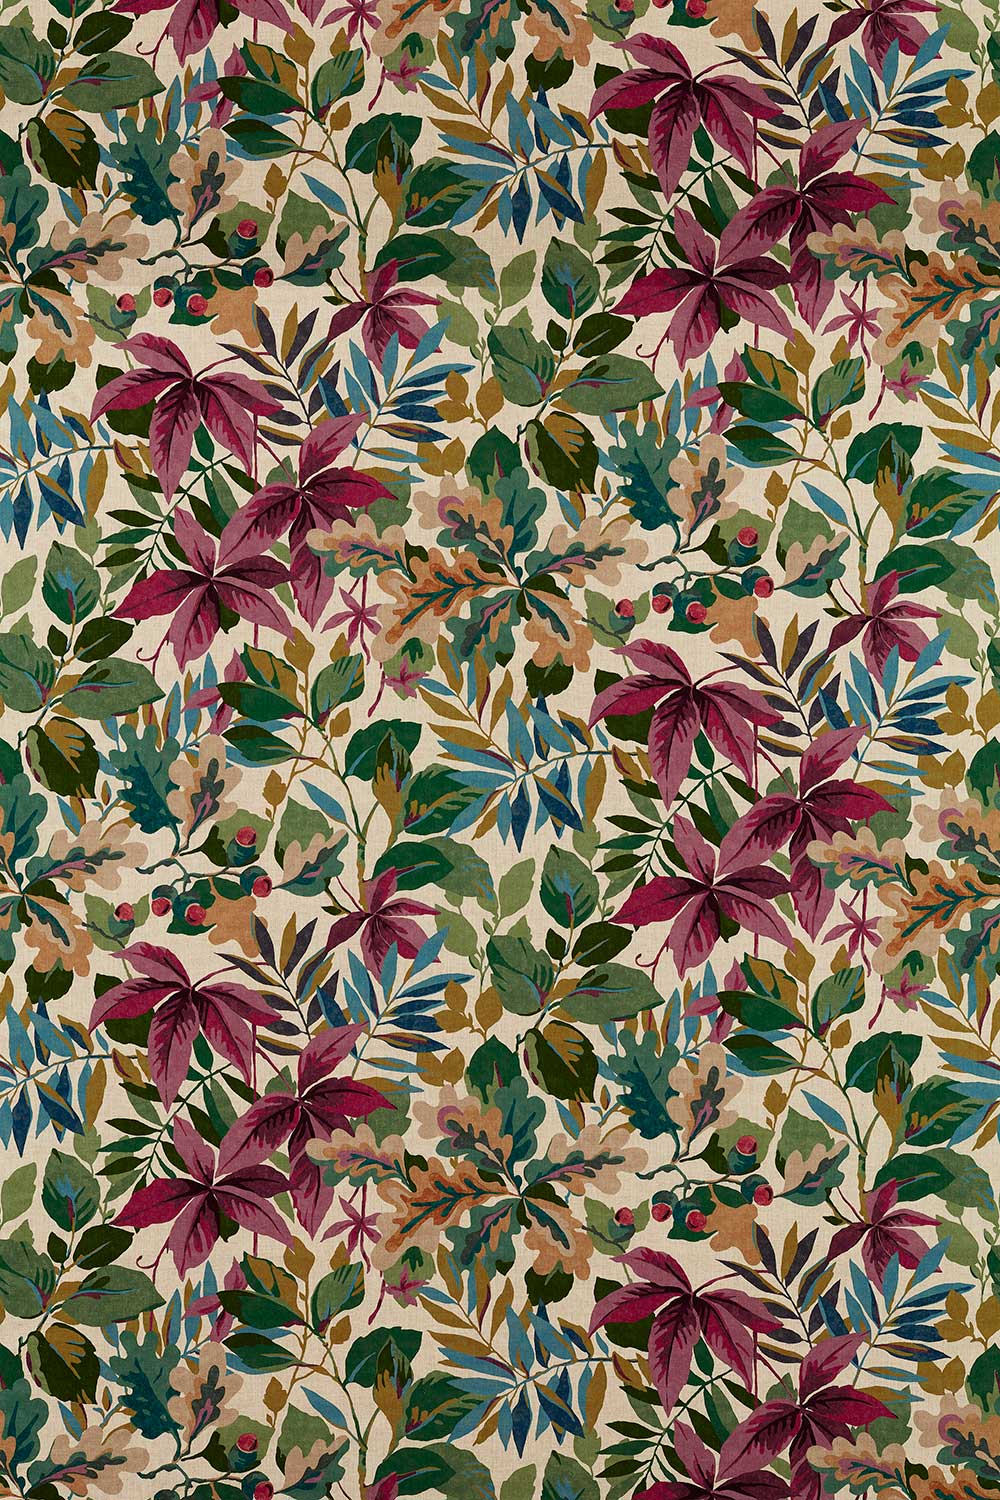 Robins Wood Fabric - Mulberry - by Sanderson